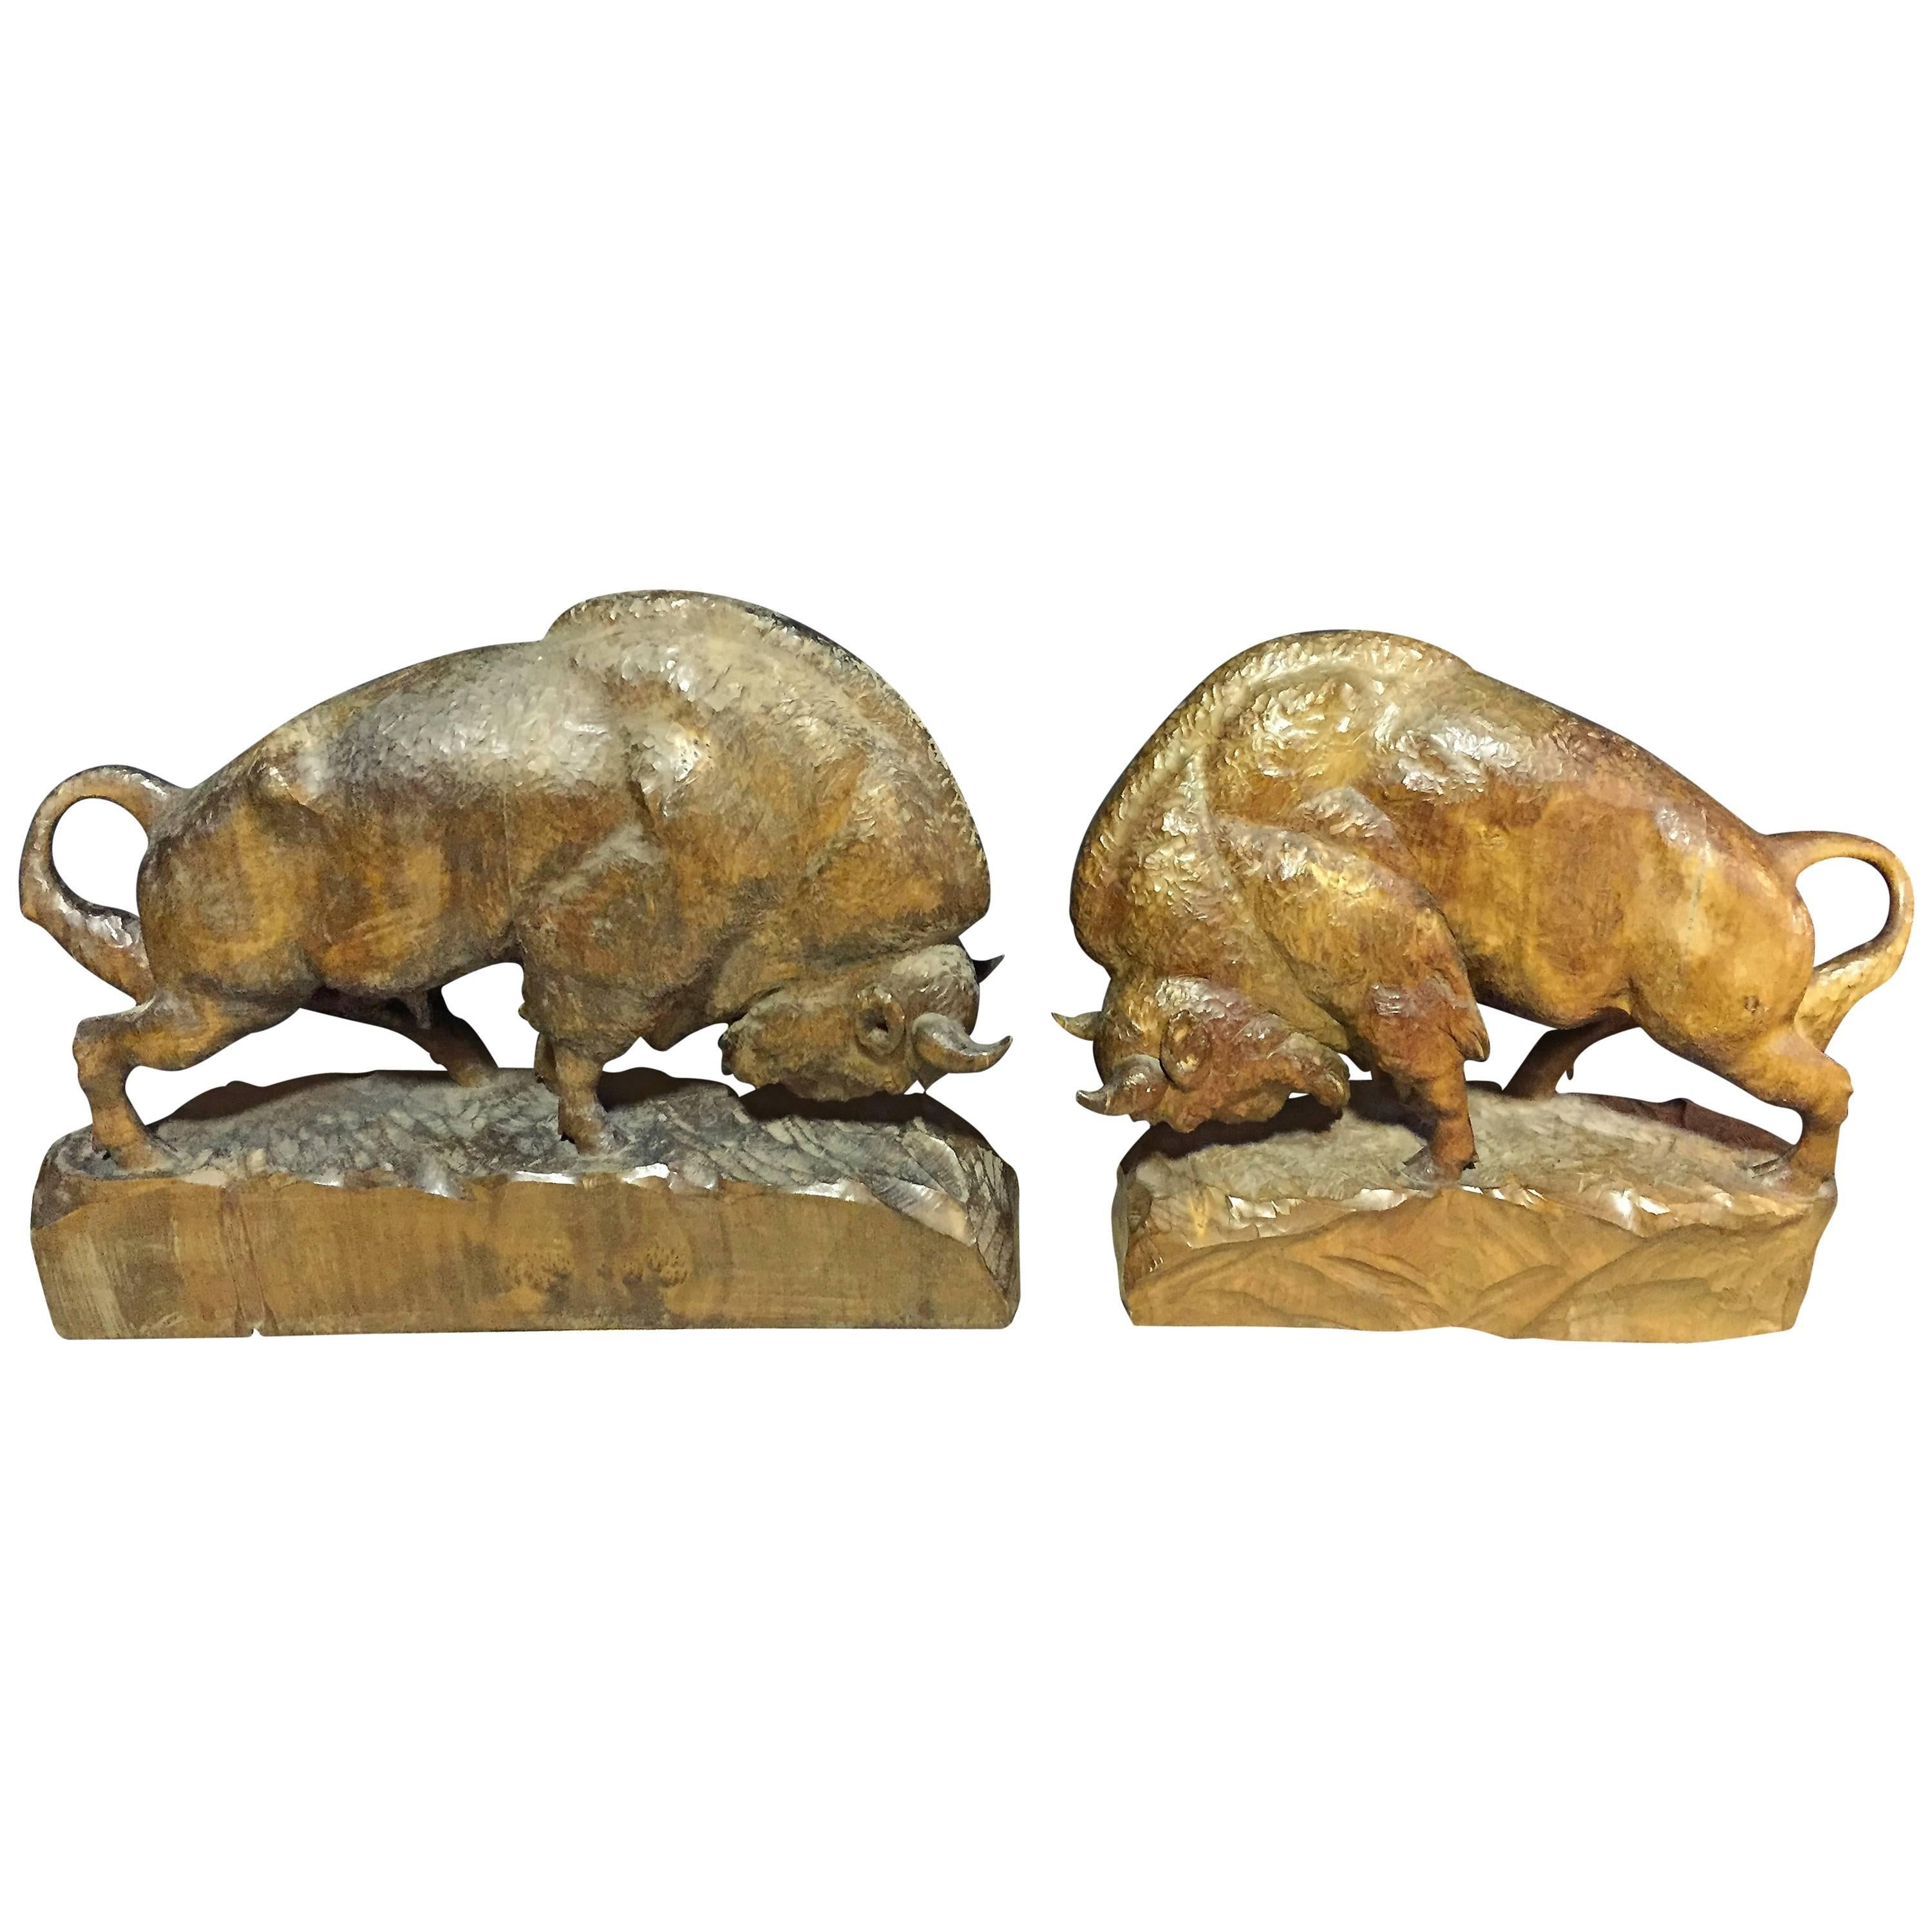 Set of hand-carved wooden bisons with nice patina